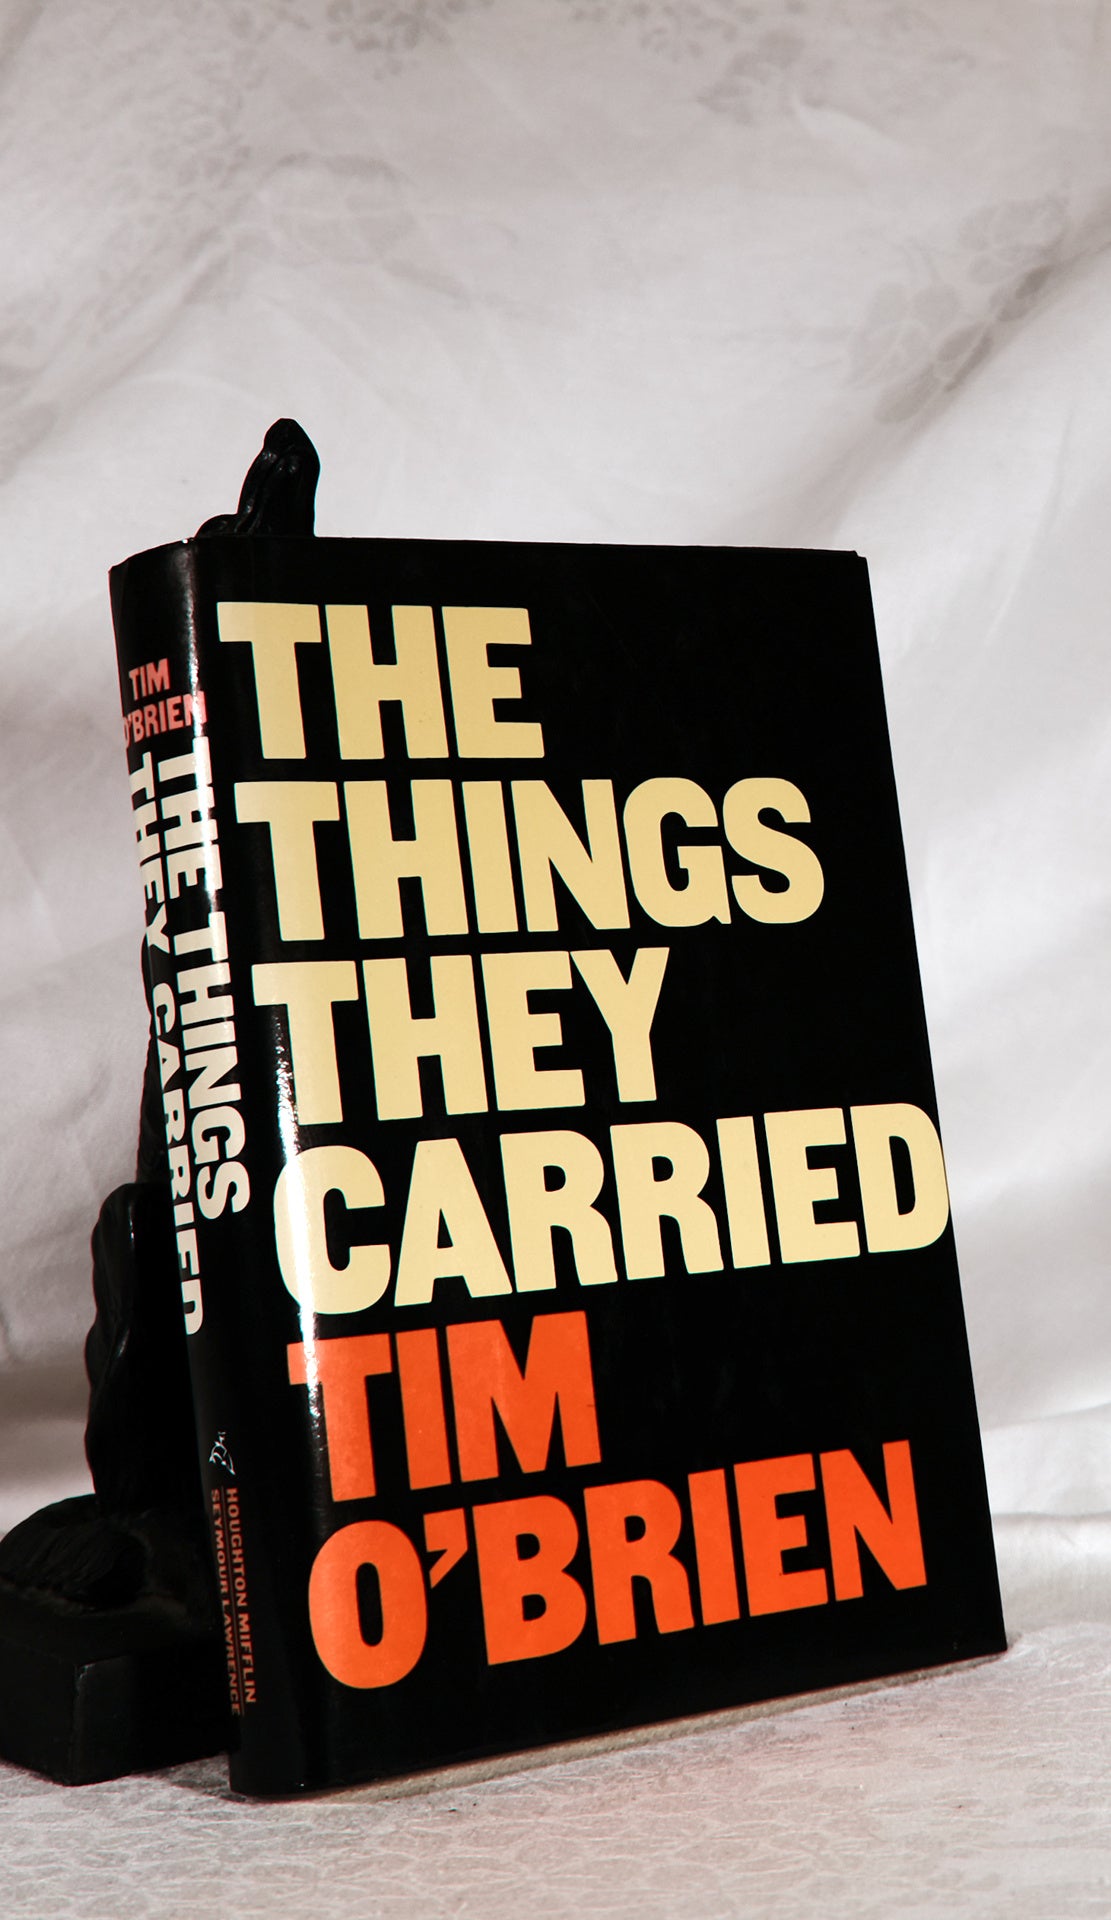 Tim　THINGS　THE　CARRIED　THEY　O'BRIEN